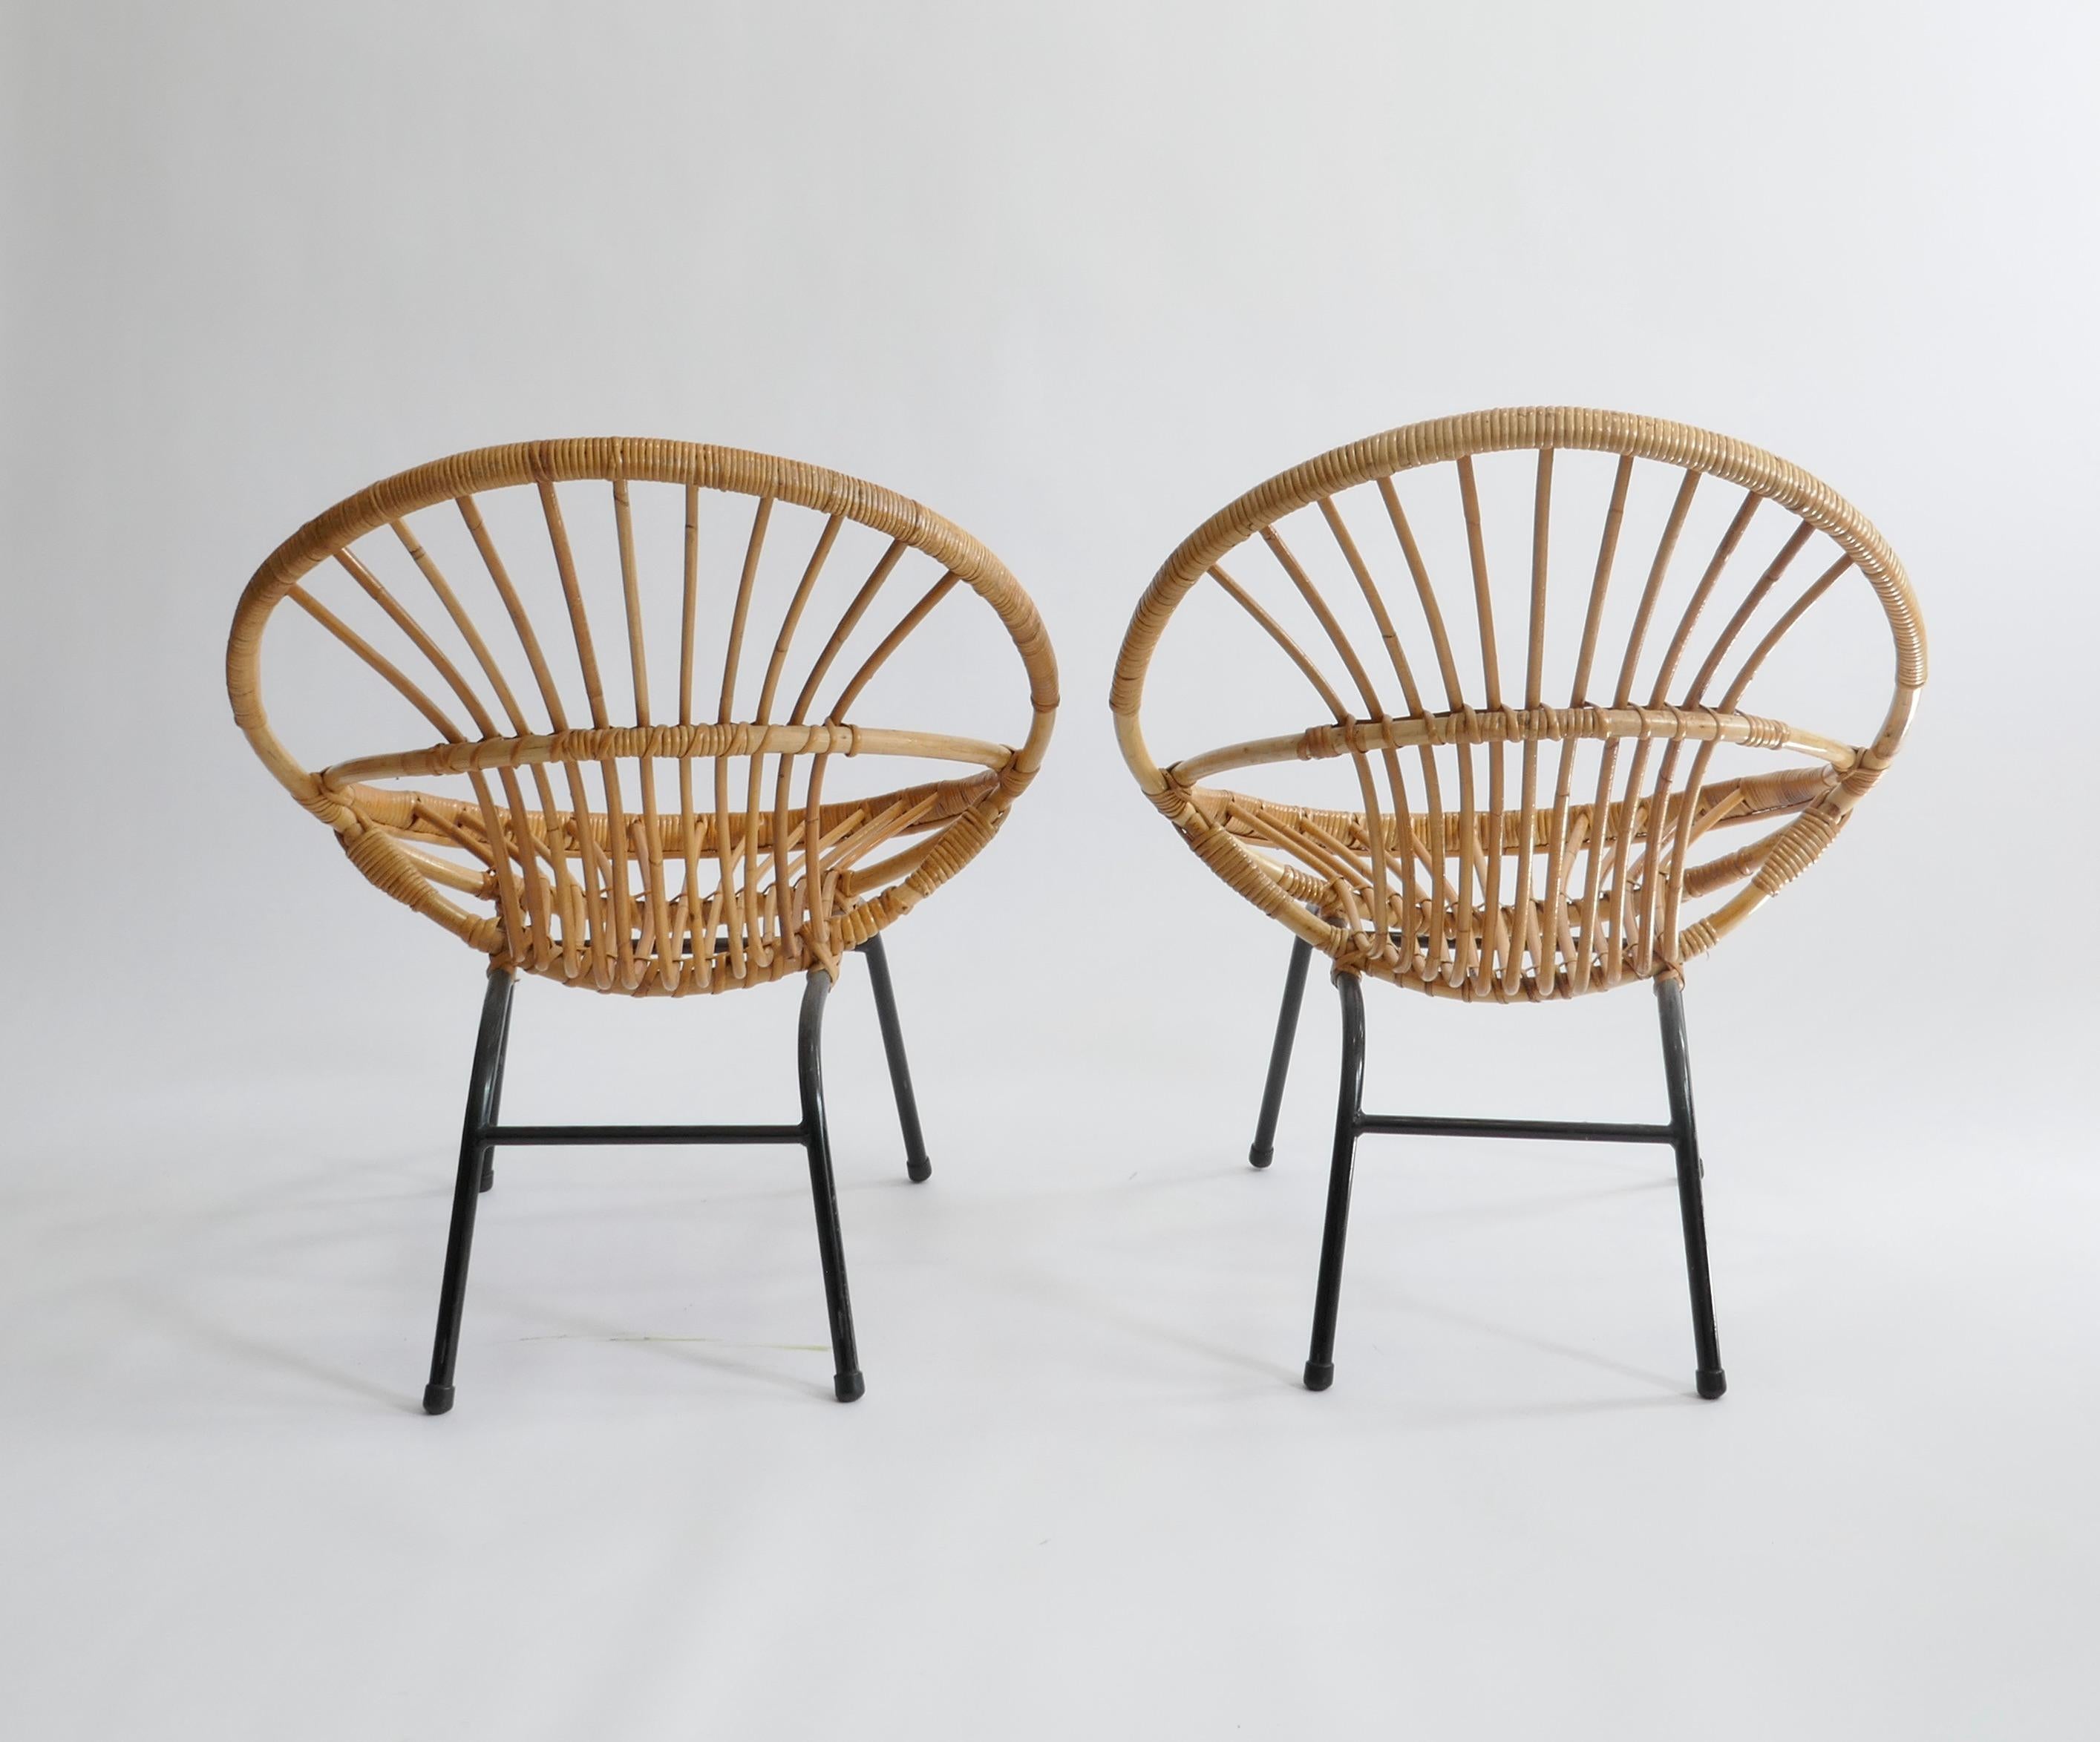 Pair of French Mid-Century Rattan Chairs, France 1950s For Sale 1